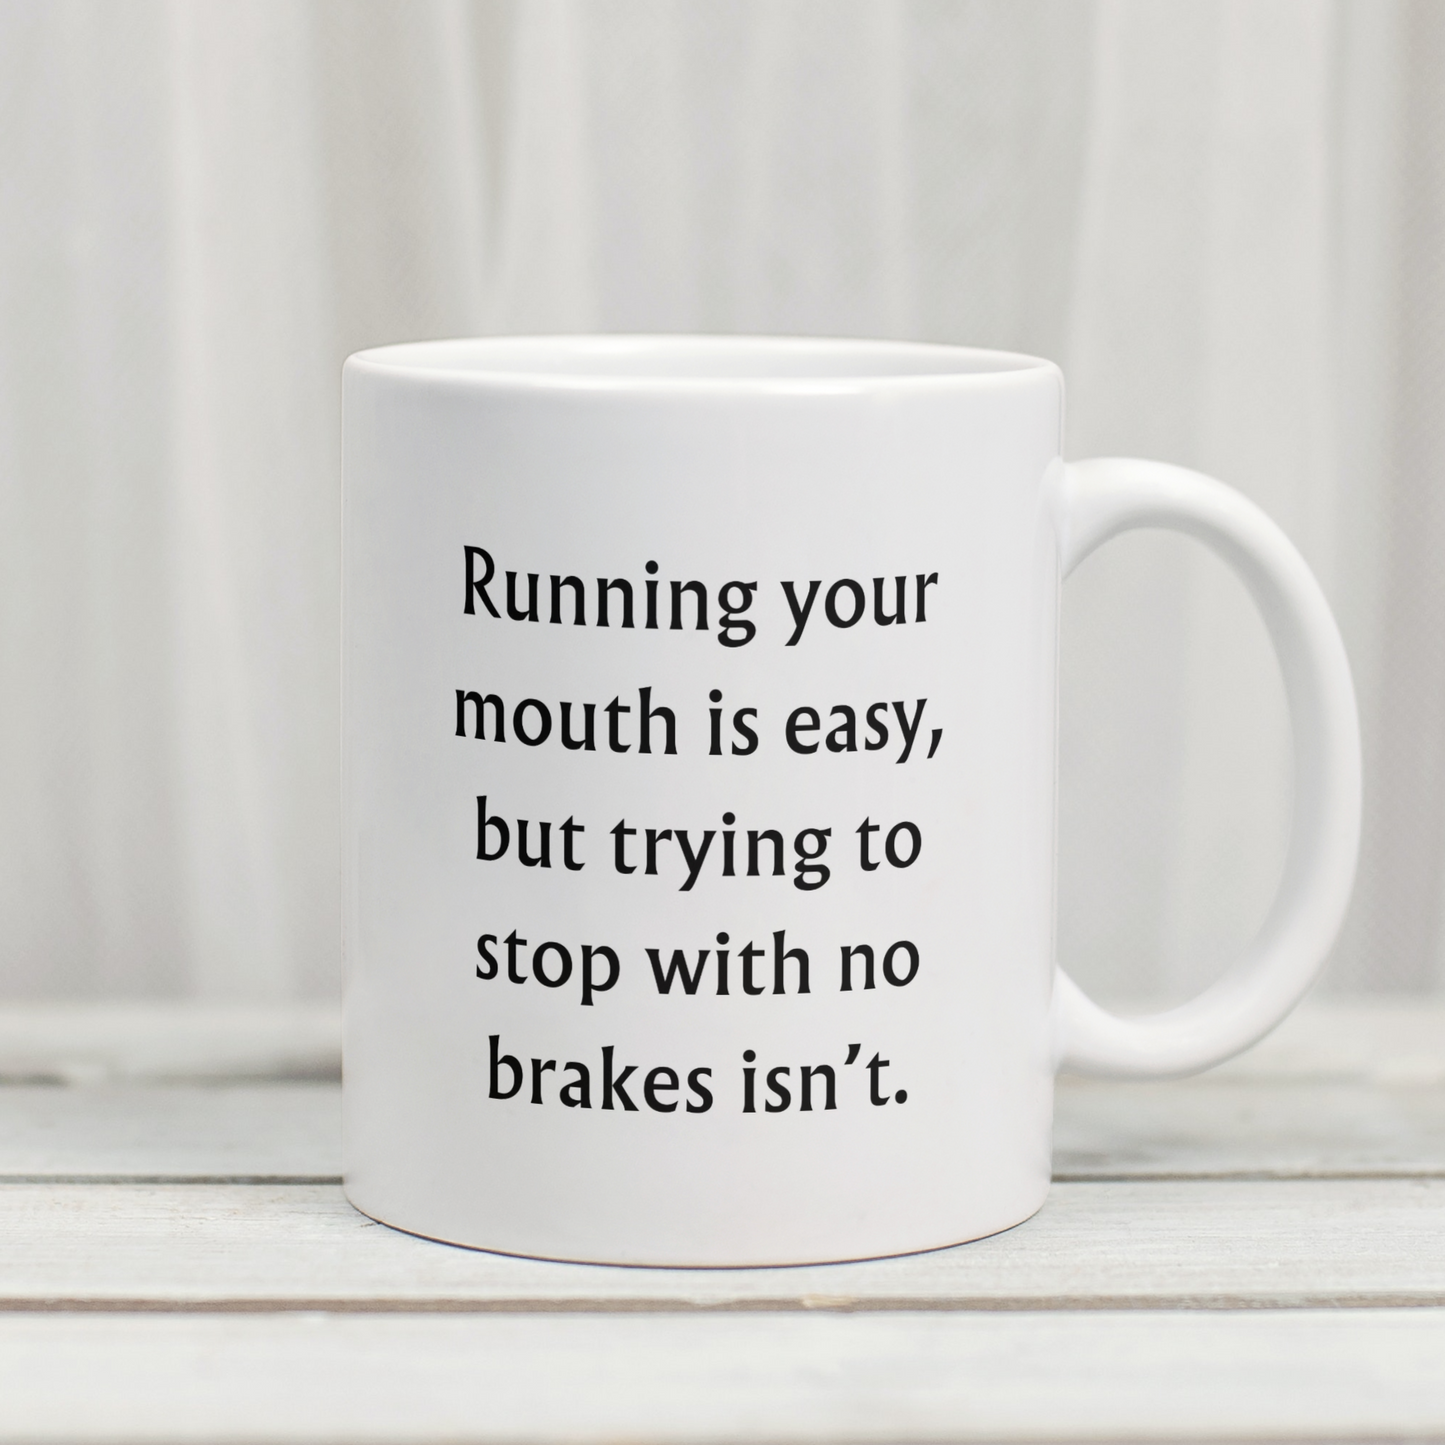 Running your mouth is easy - Mug